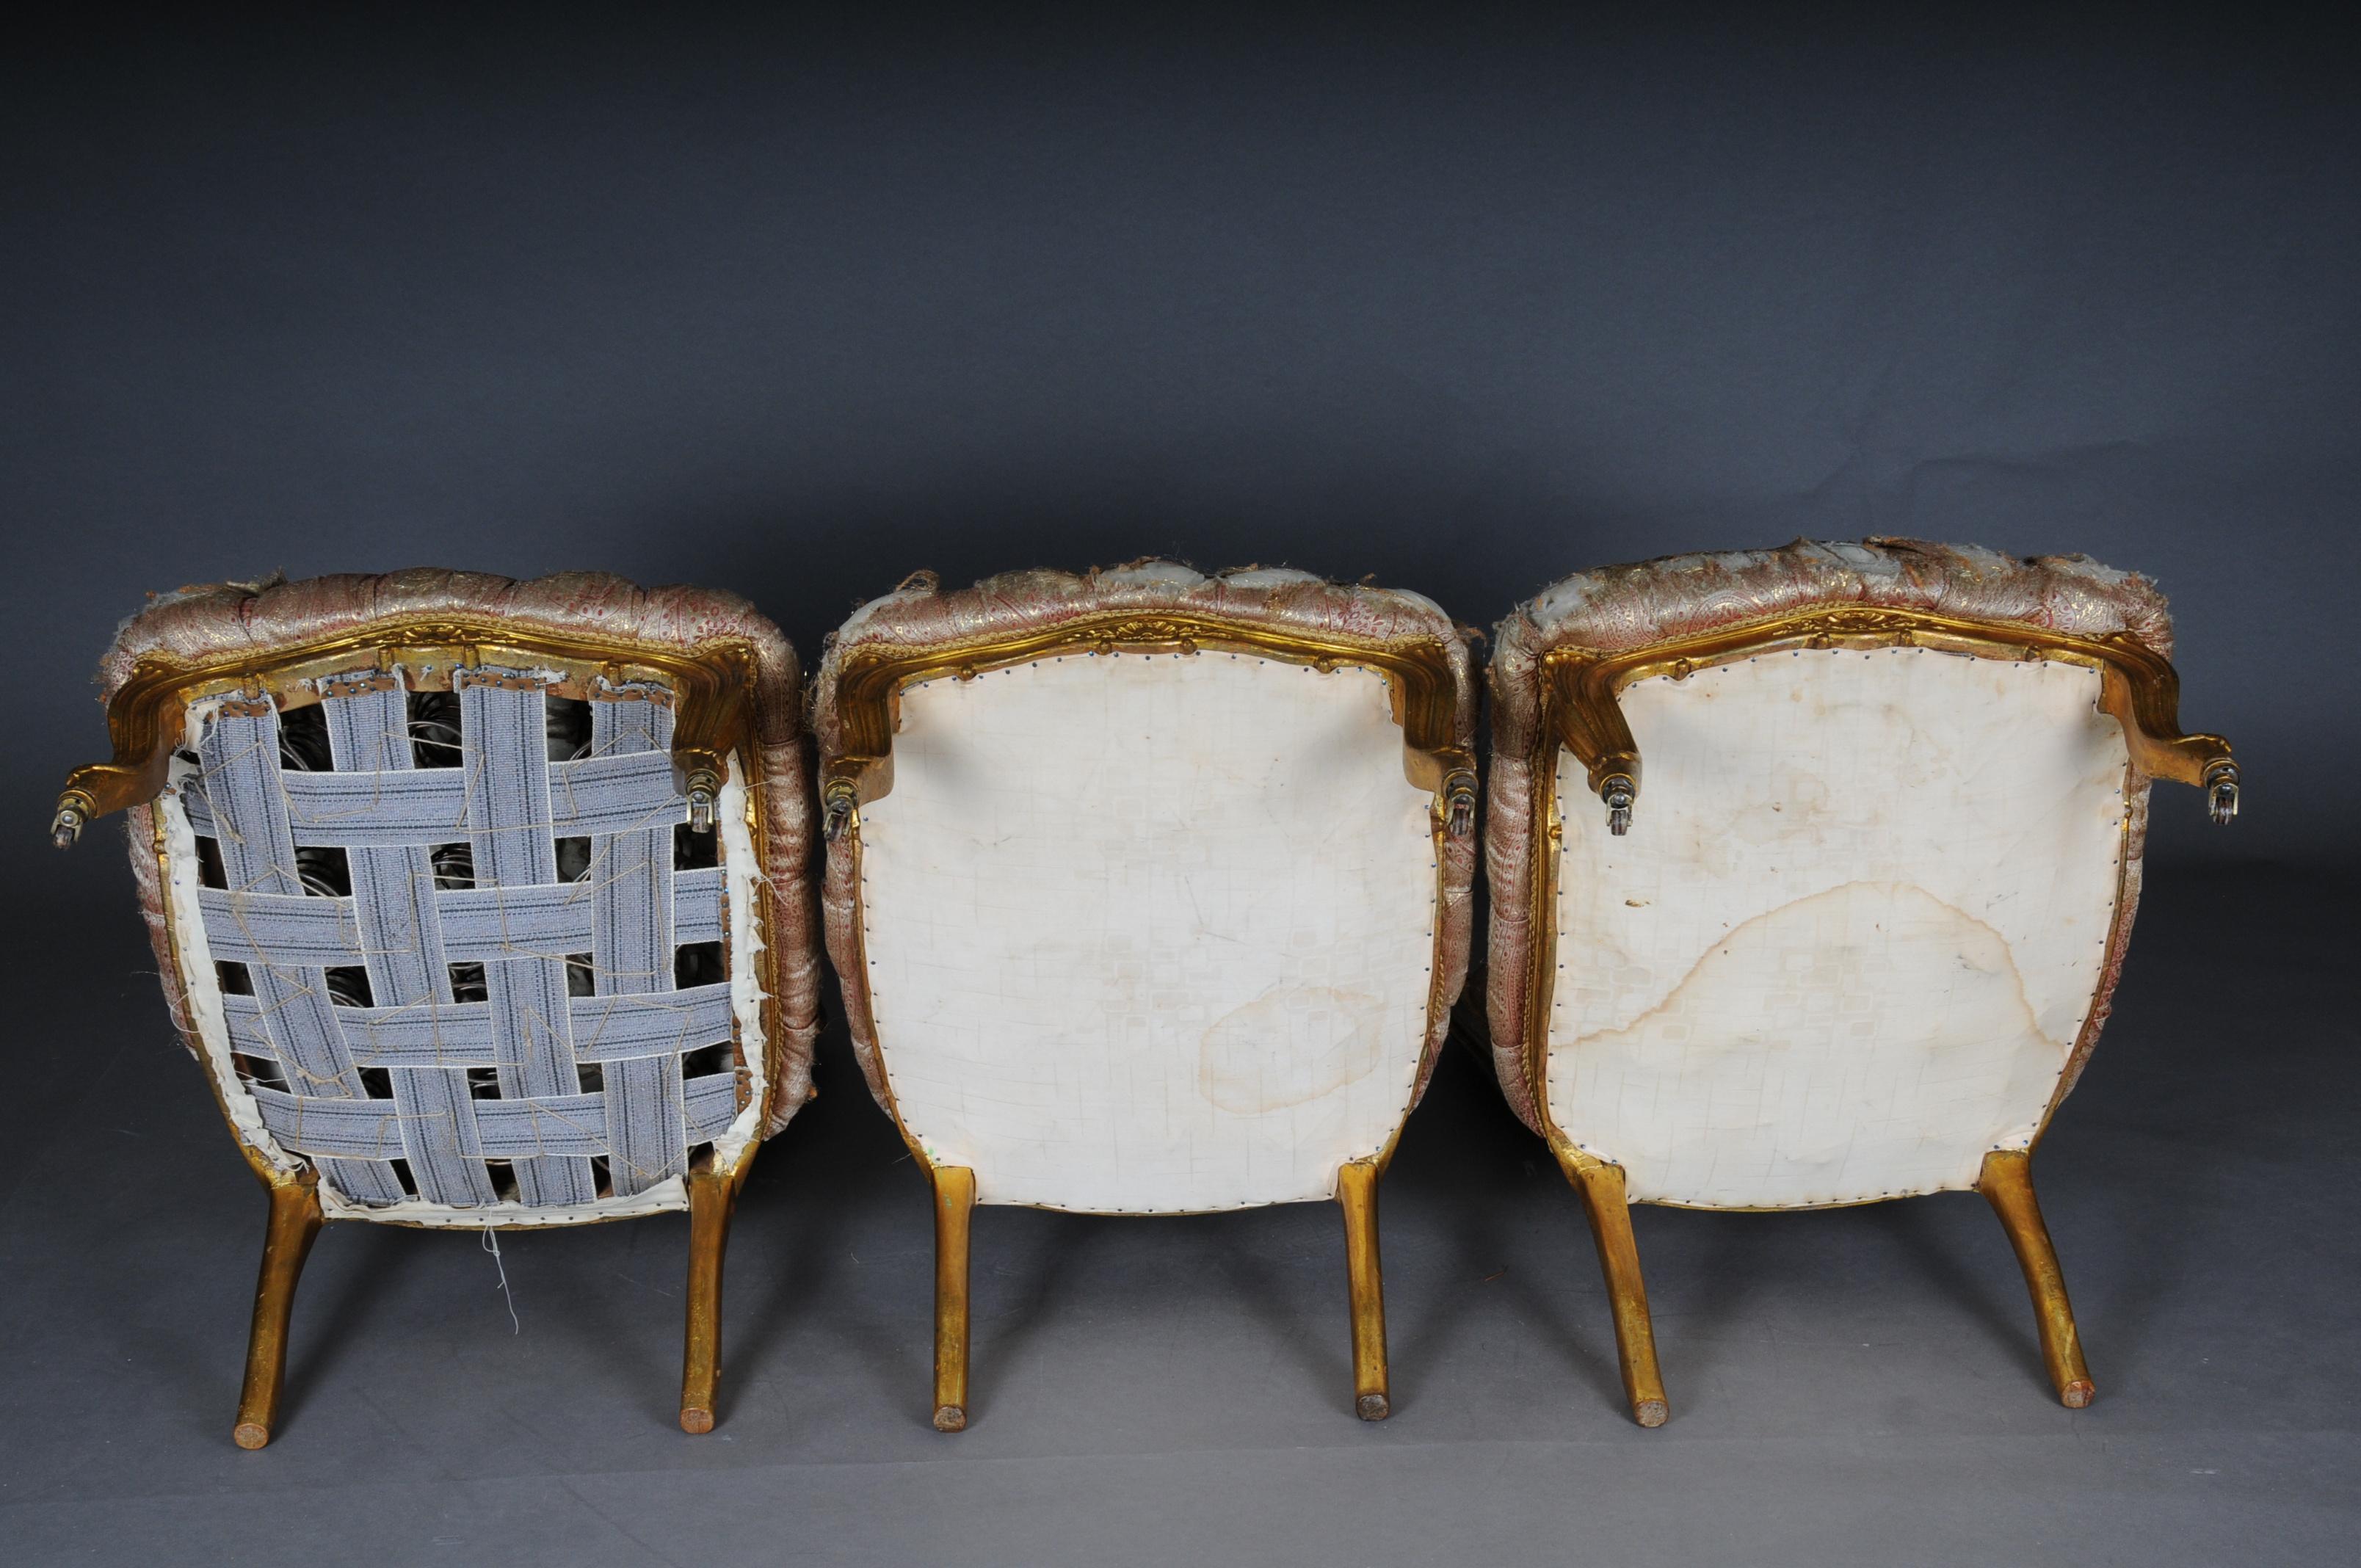 3 French Salon Lounge Chairs from the Bellevue Palace in Berlin, Gold from 1890 For Sale 2